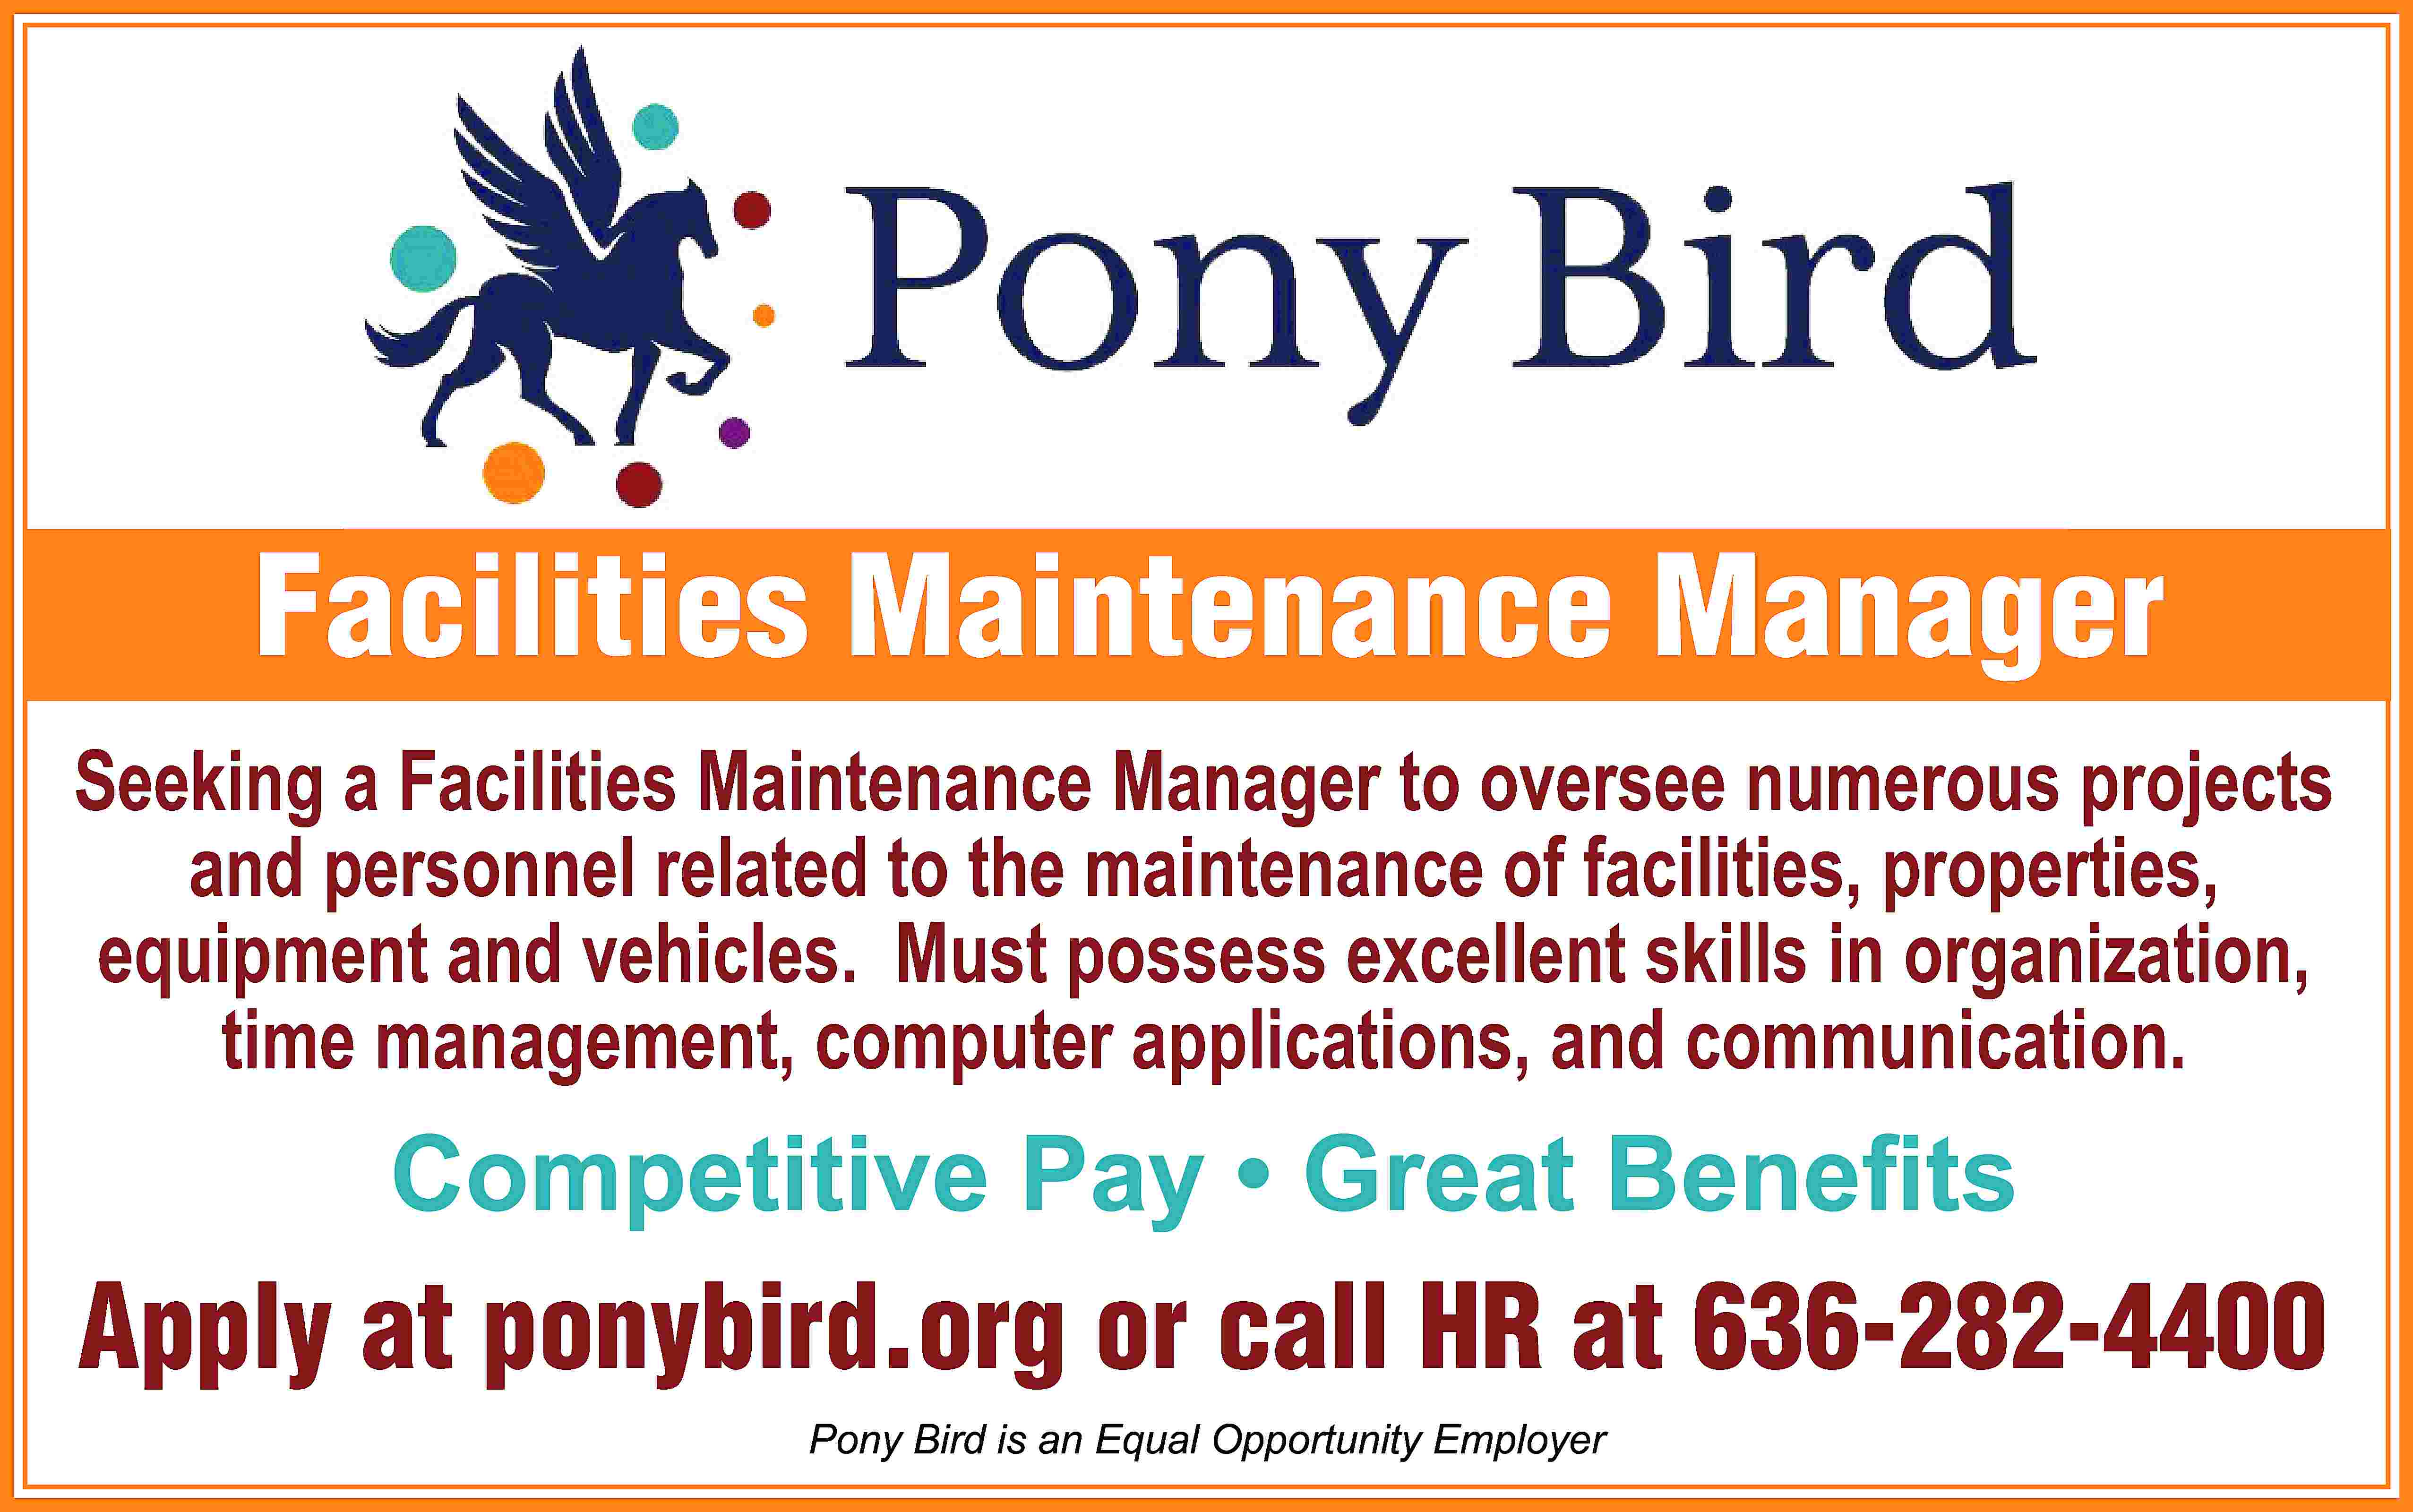 Facilities Maintenance Manager Seeking a  Facilities Maintenance Manager Seeking a Facilities Maintenance Manager to oversee numerous projects and personnel related to the maintenance of facilities, properties, equipment and vehicles. Must possess excellent skills in organization, time management, computer applications, and communication. Competitive Pay • Great Beneﬁts Apply at ponybird.org or call HR at 636-282-4400 Pony Bird is an Equal Opportunity Employer